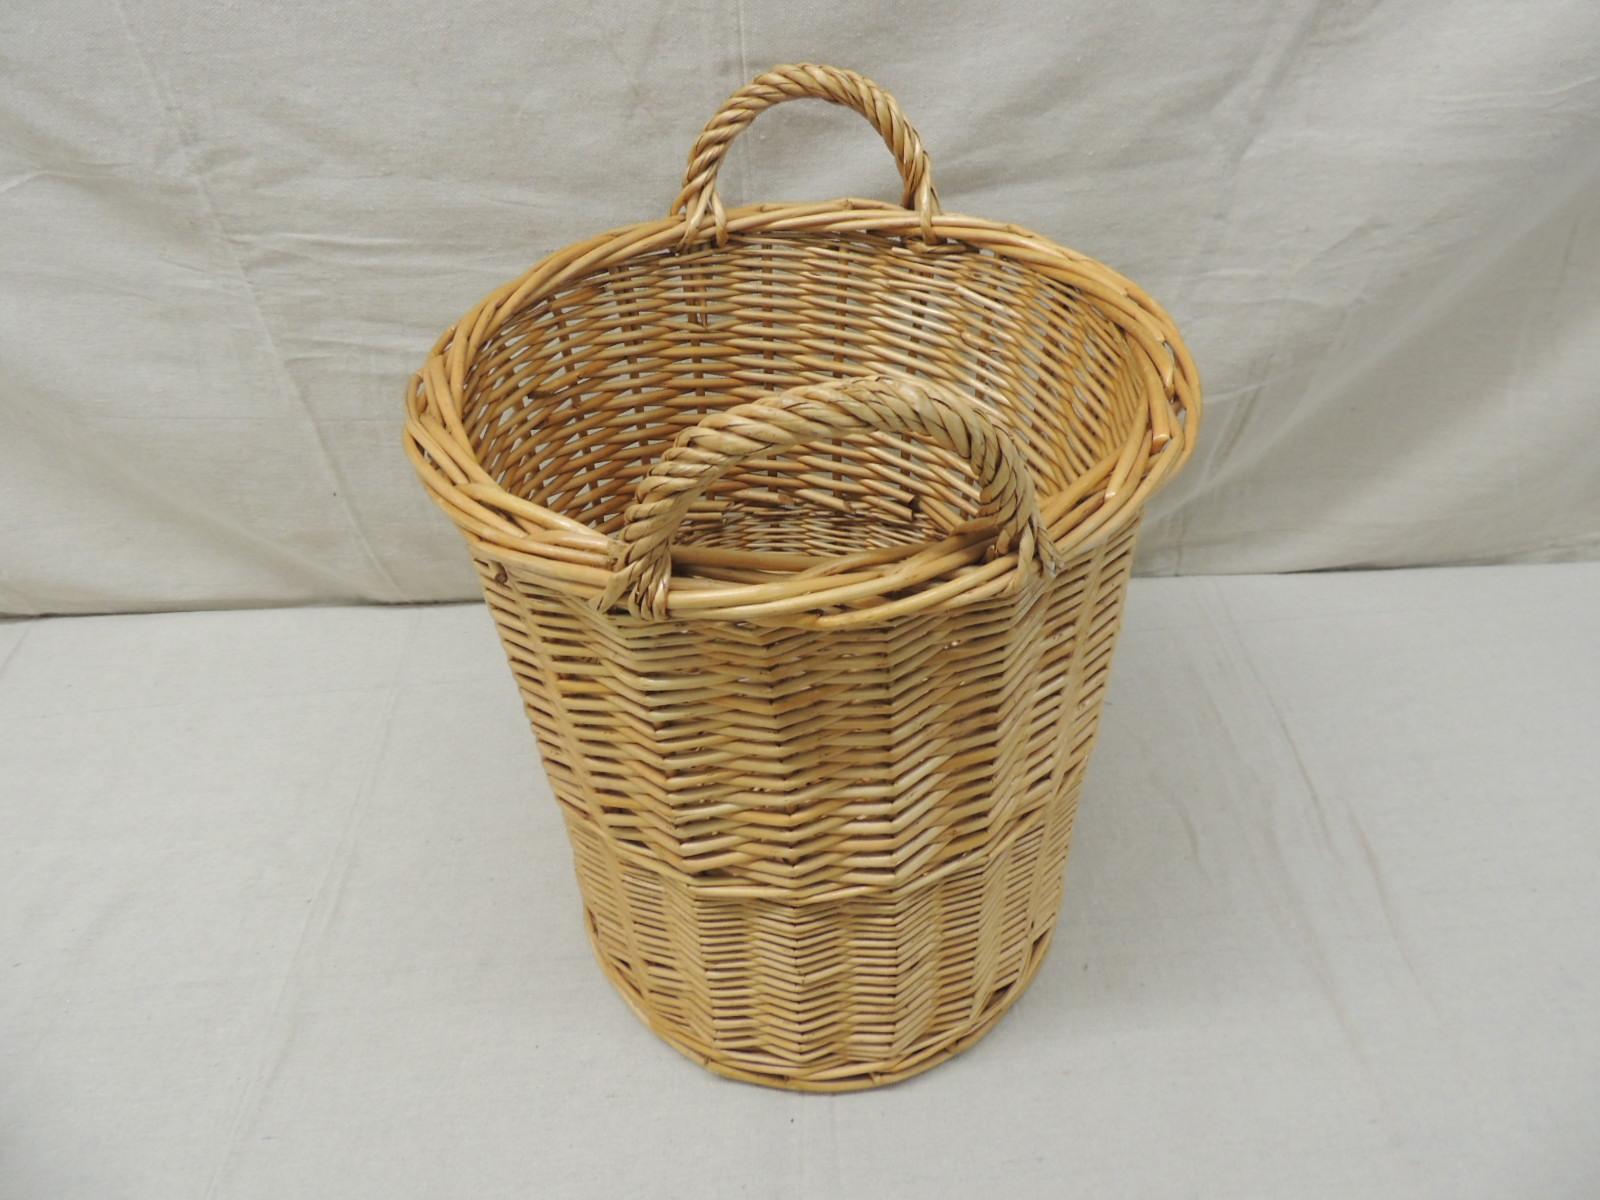 Bohemian Round Woven Basket or Wastebasket with Handles